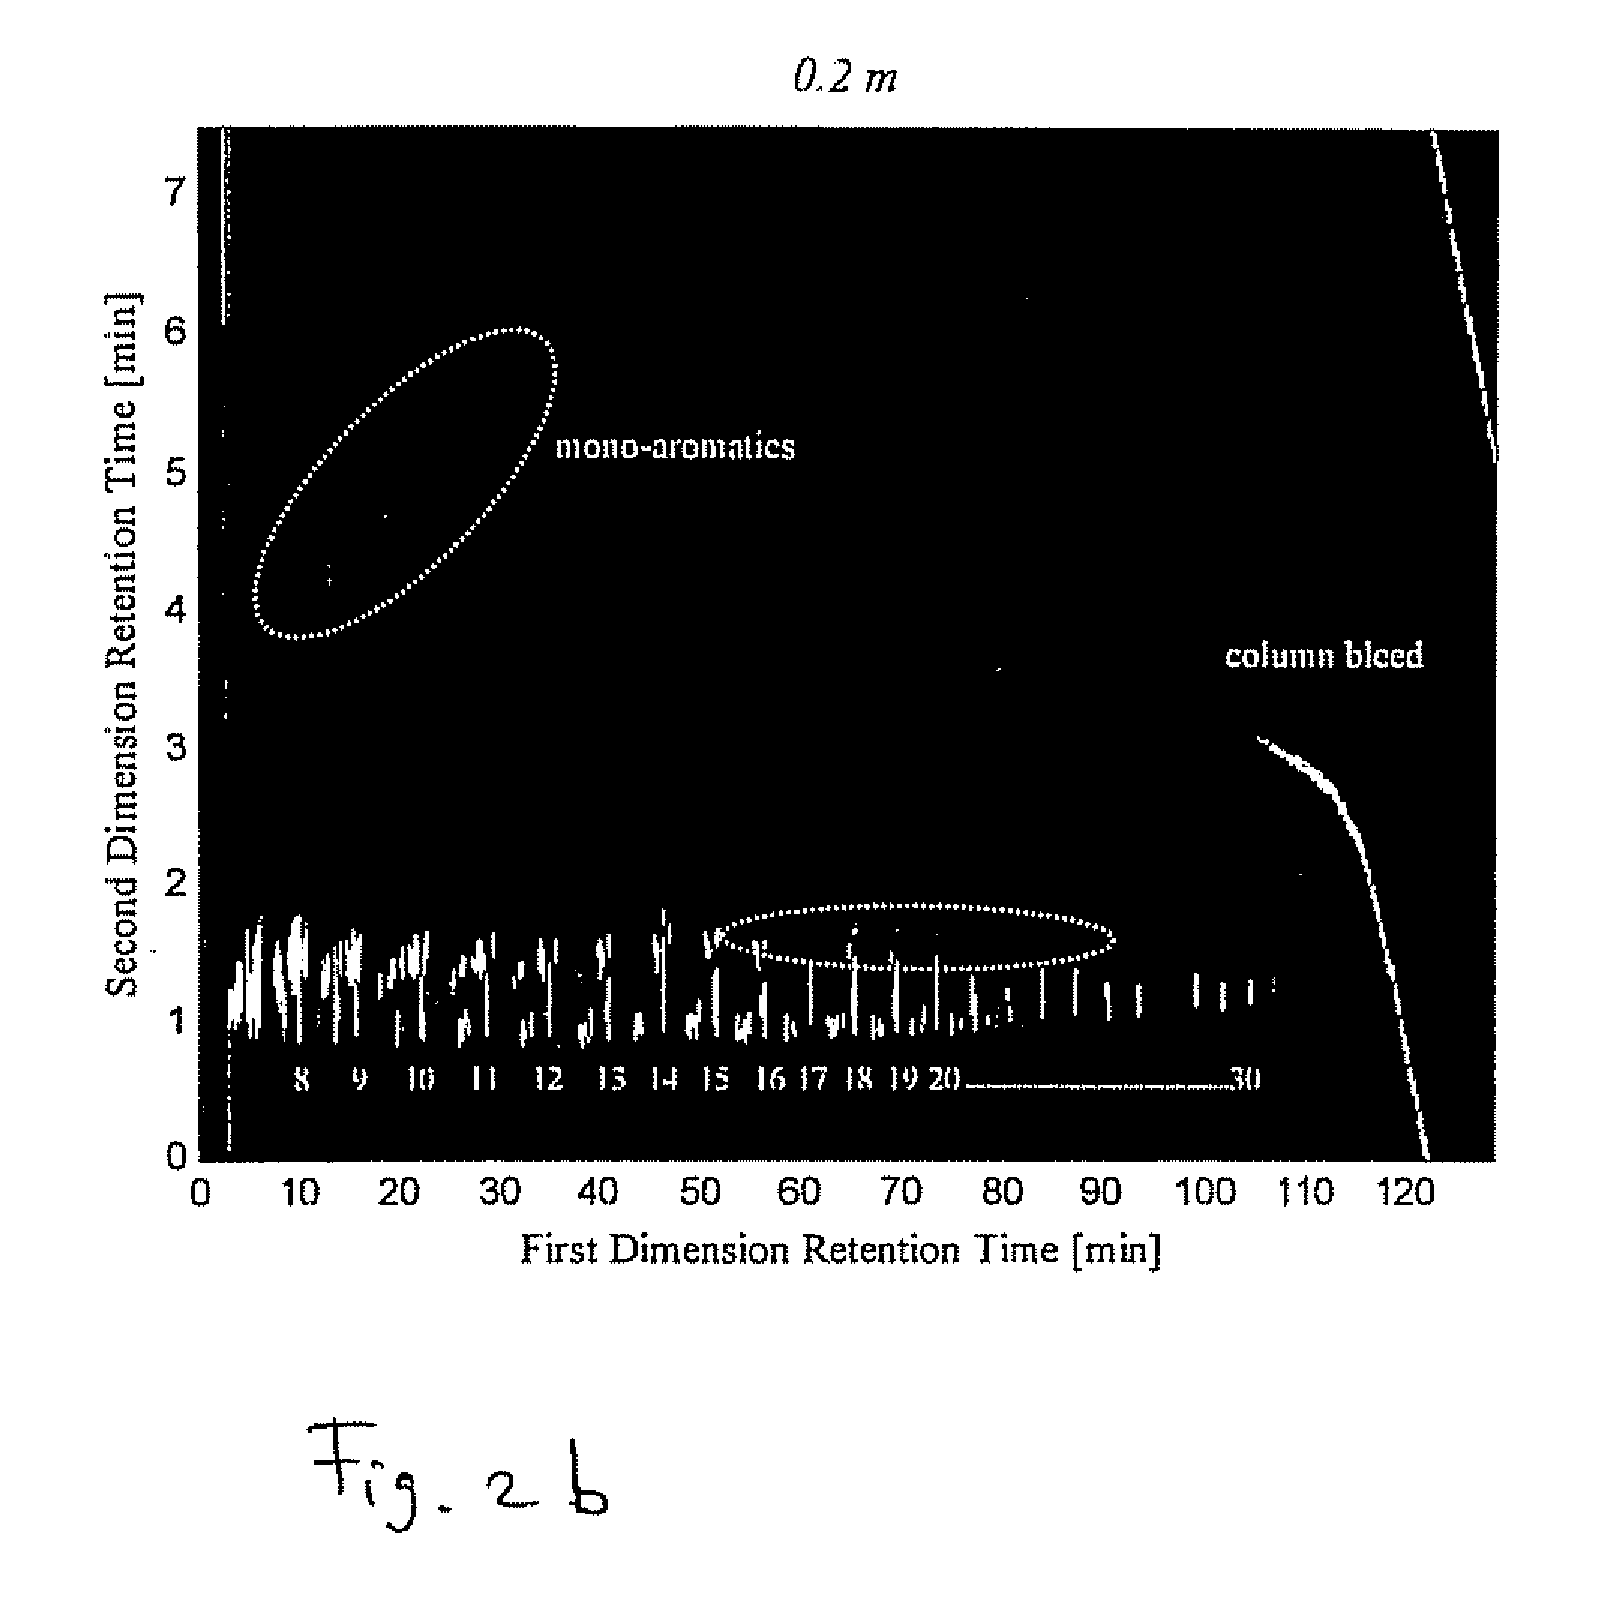 Method to measure olefins in a complex hydrocarbon mixture